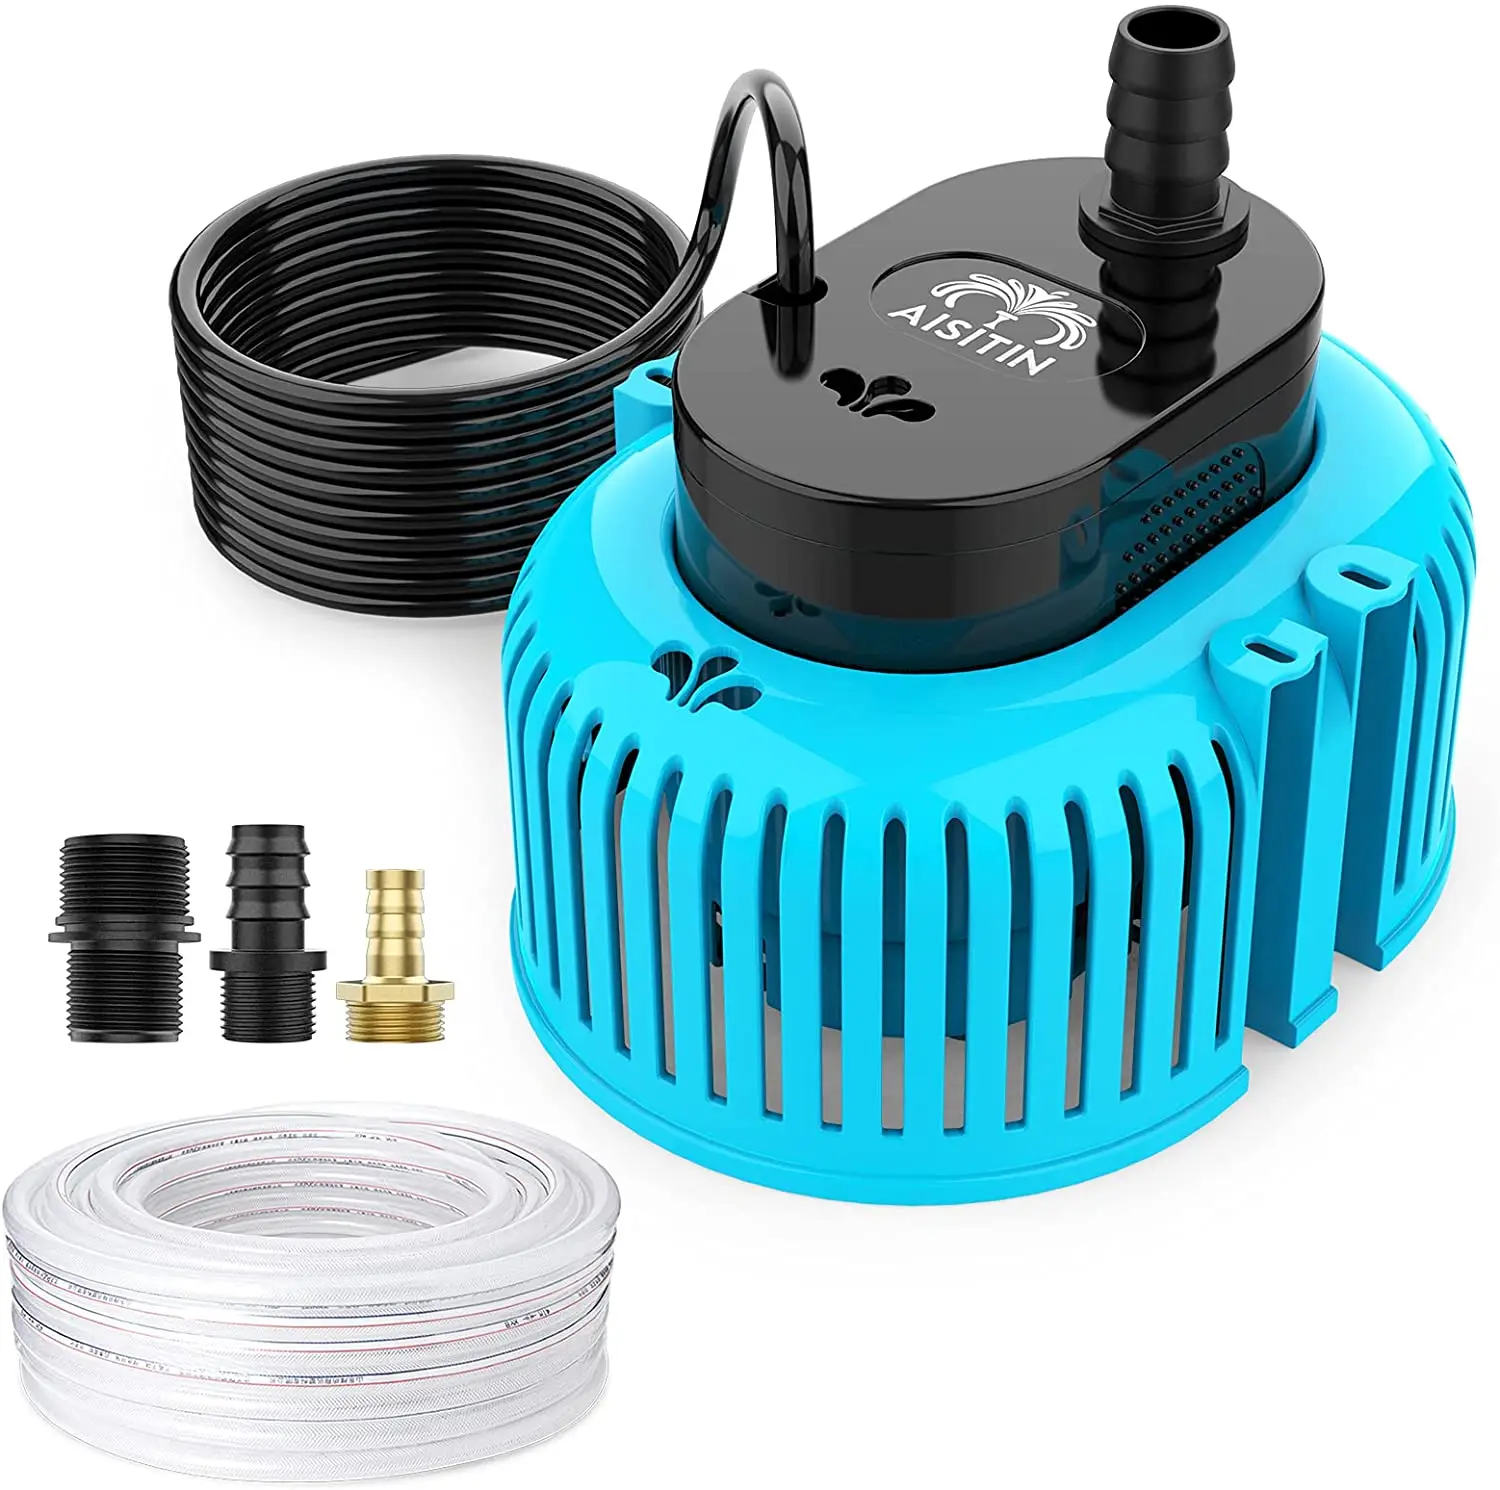 

AISITIN 80W Pool Cover Pump, 850 GPH Above Ground Sump Pumps, Submersible Water Pump with 16.4' Drainage Hose